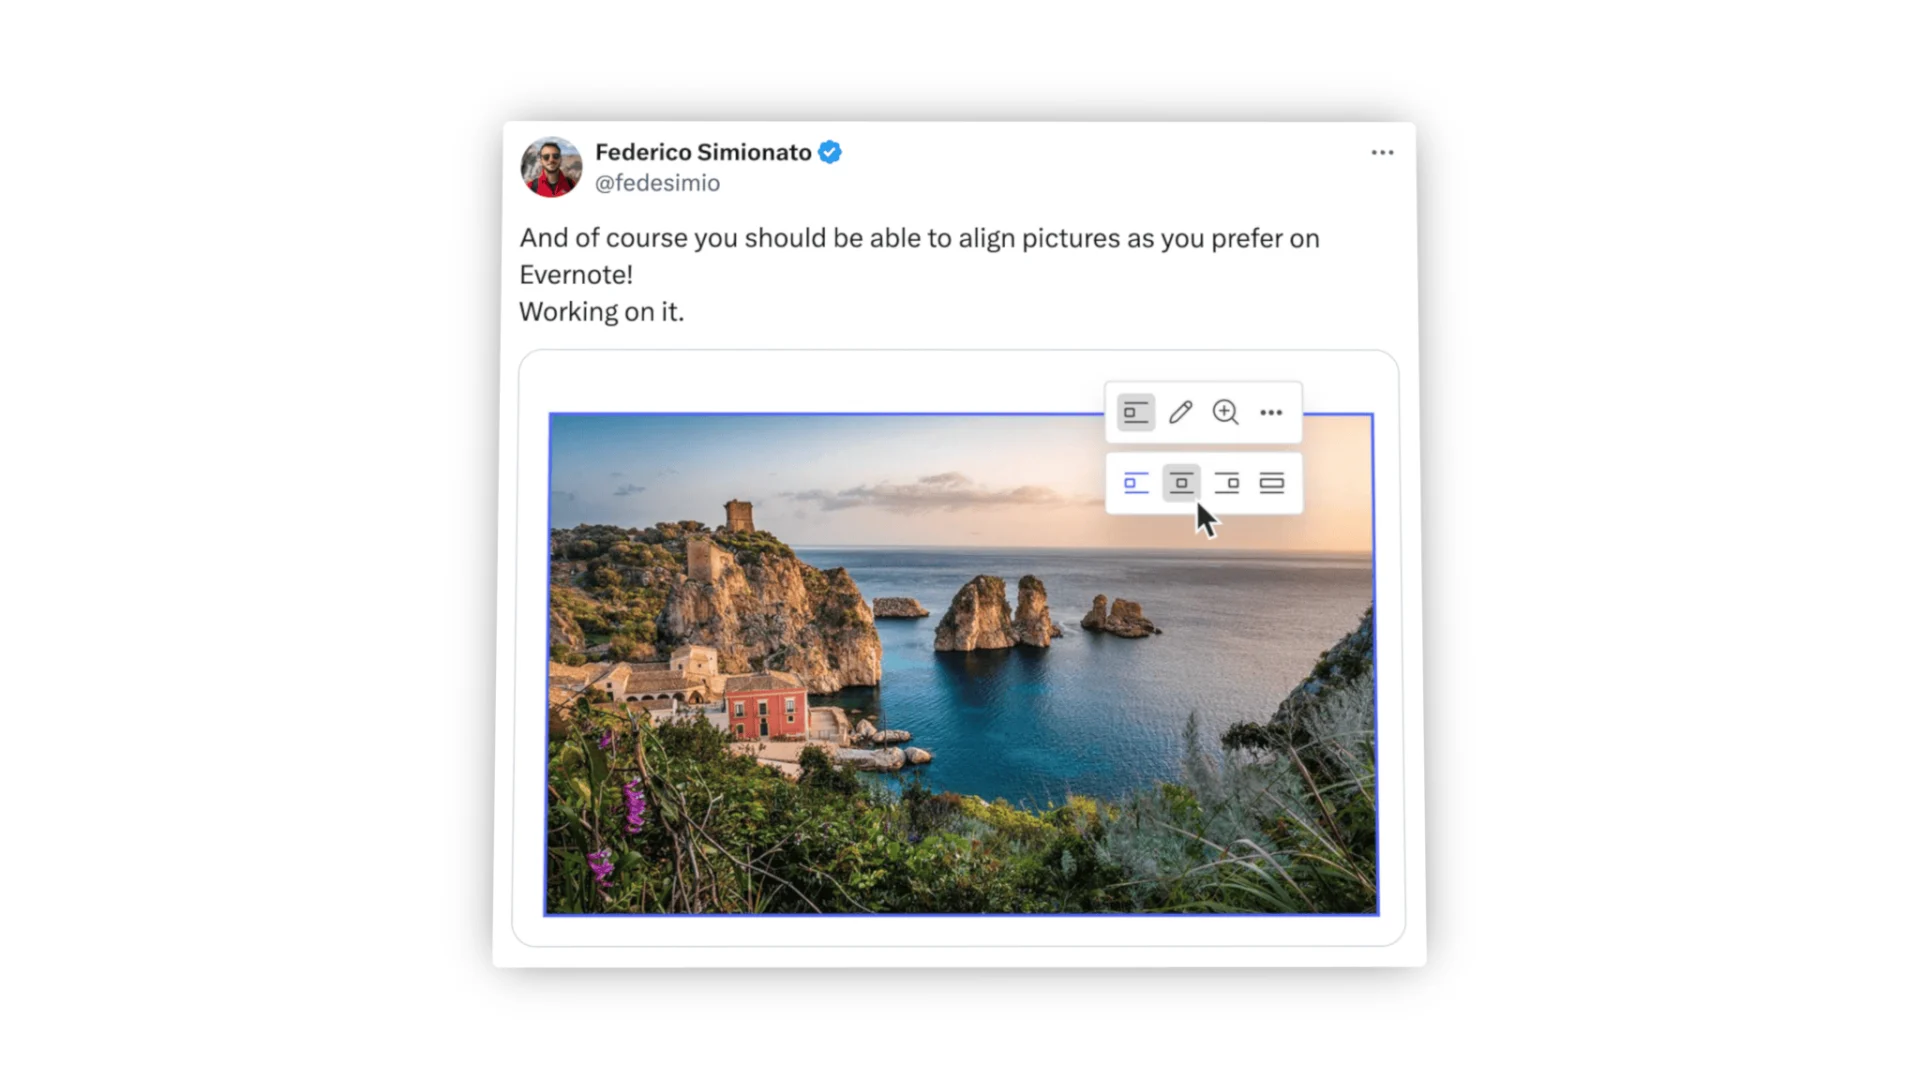 Evernote - Image Alignment Release